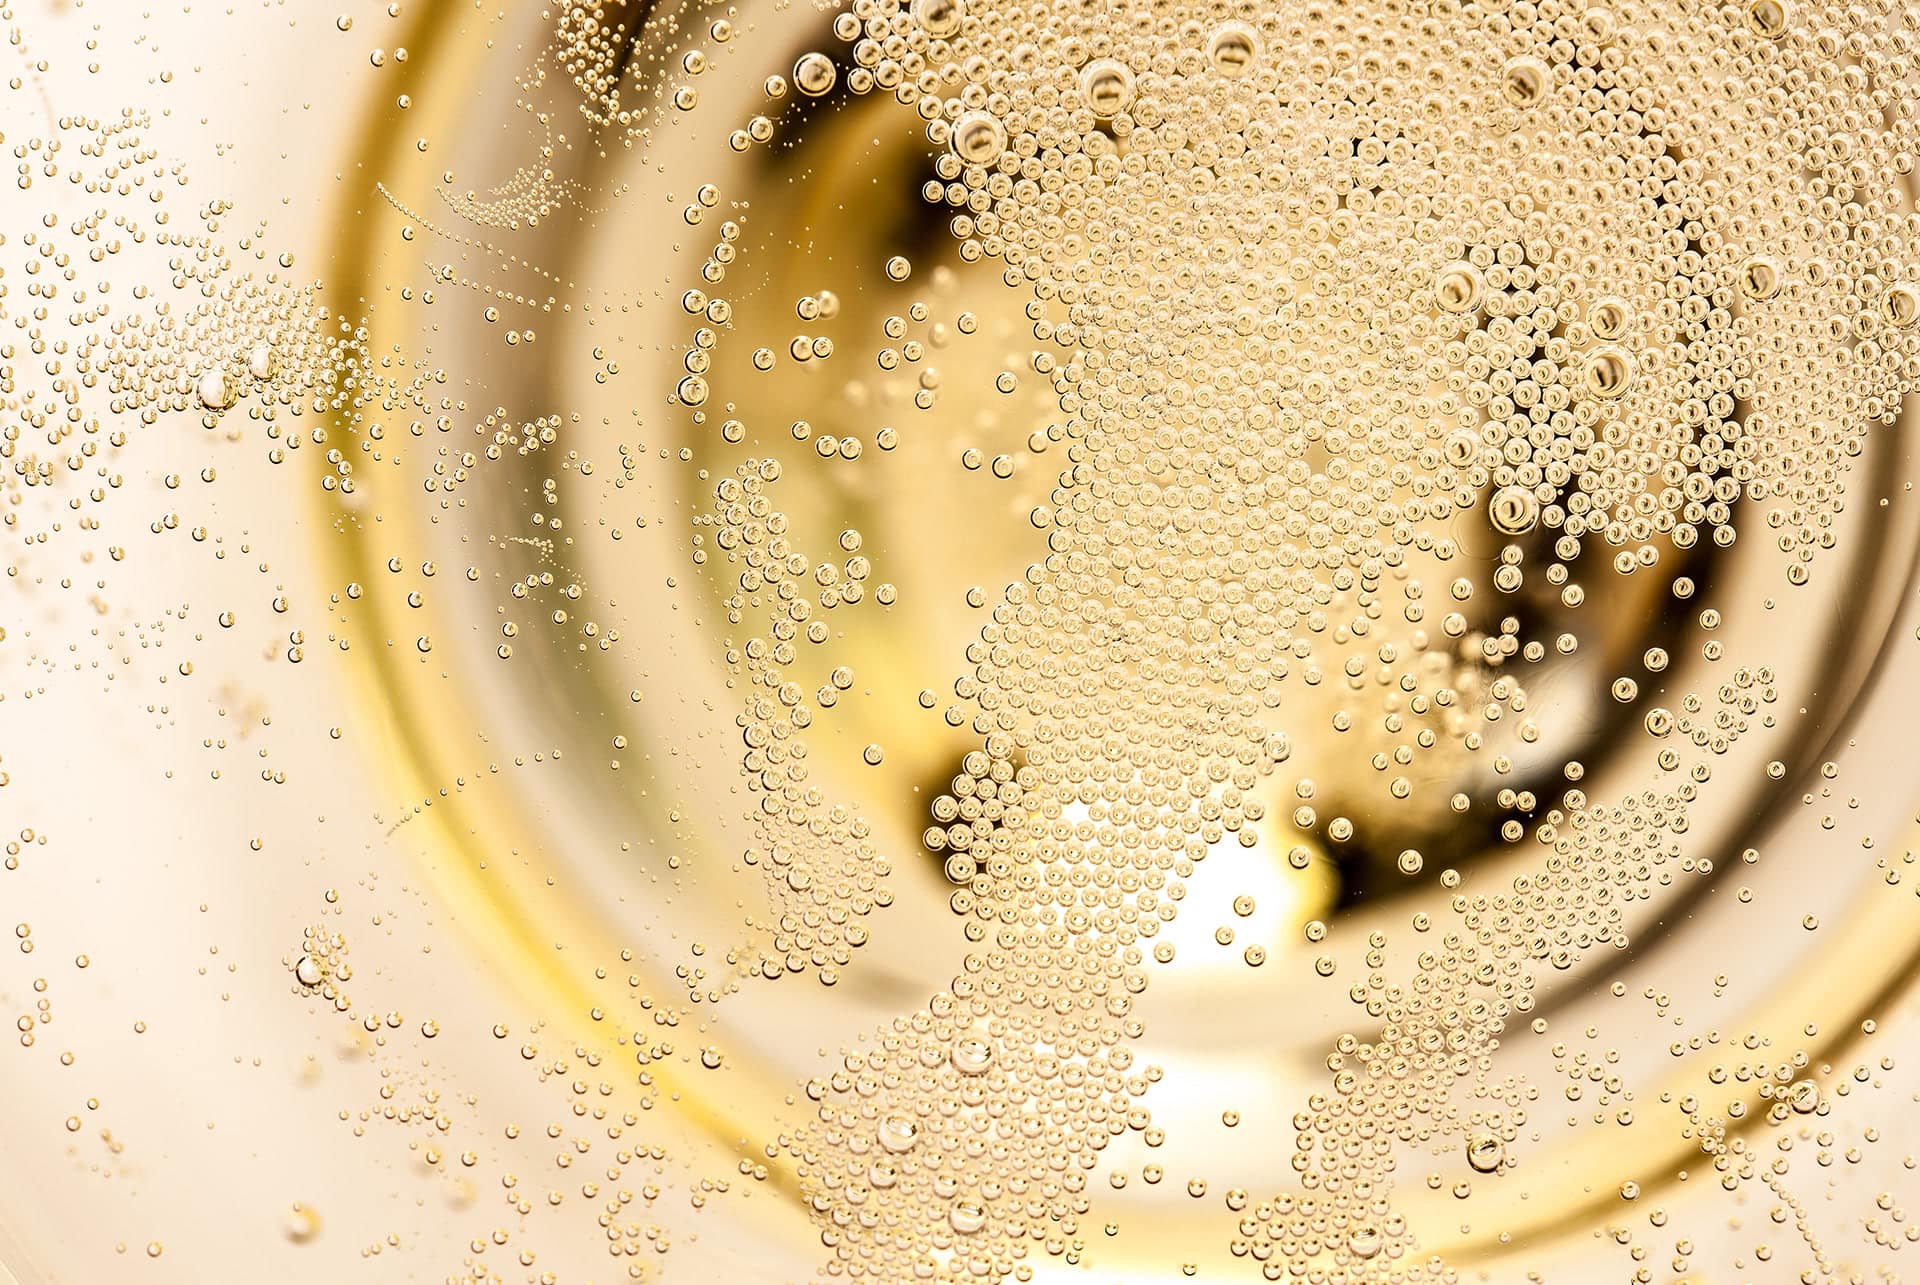 Cava – All info about the Spanish sparkling wine